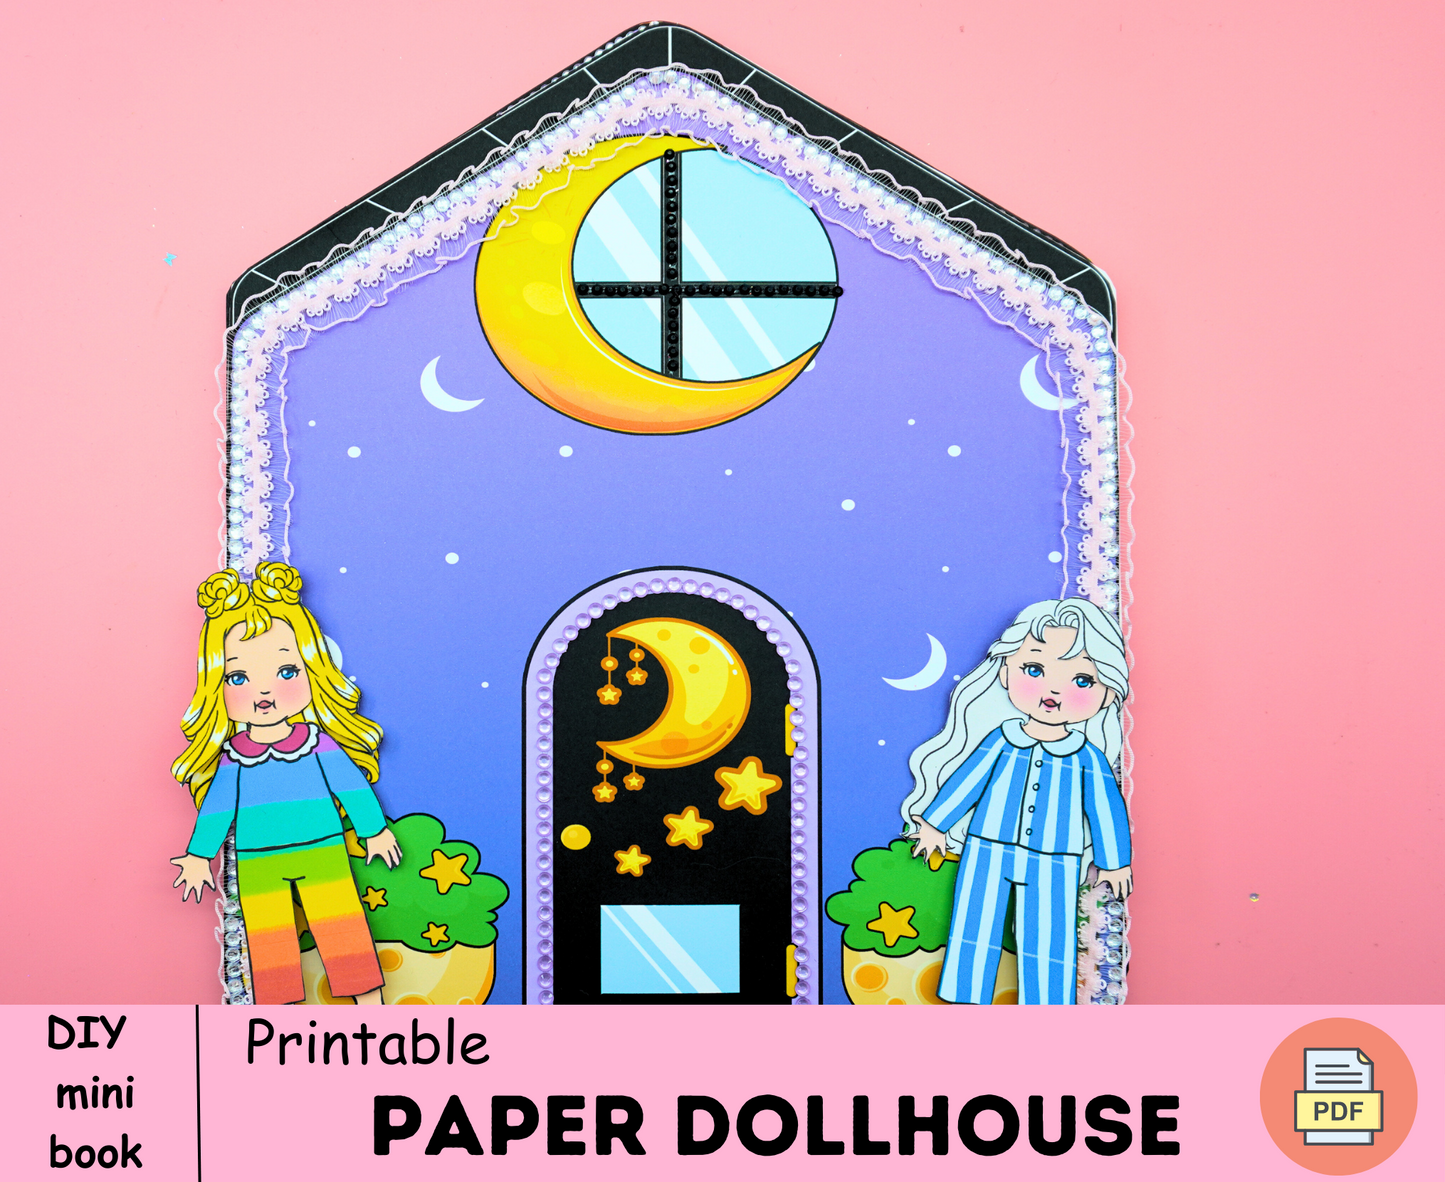 Barbie's moon house printables 🌙 DIY kit for your little one - Paper doll house - Activity book for kids 🌙 Woa Doll Crafts